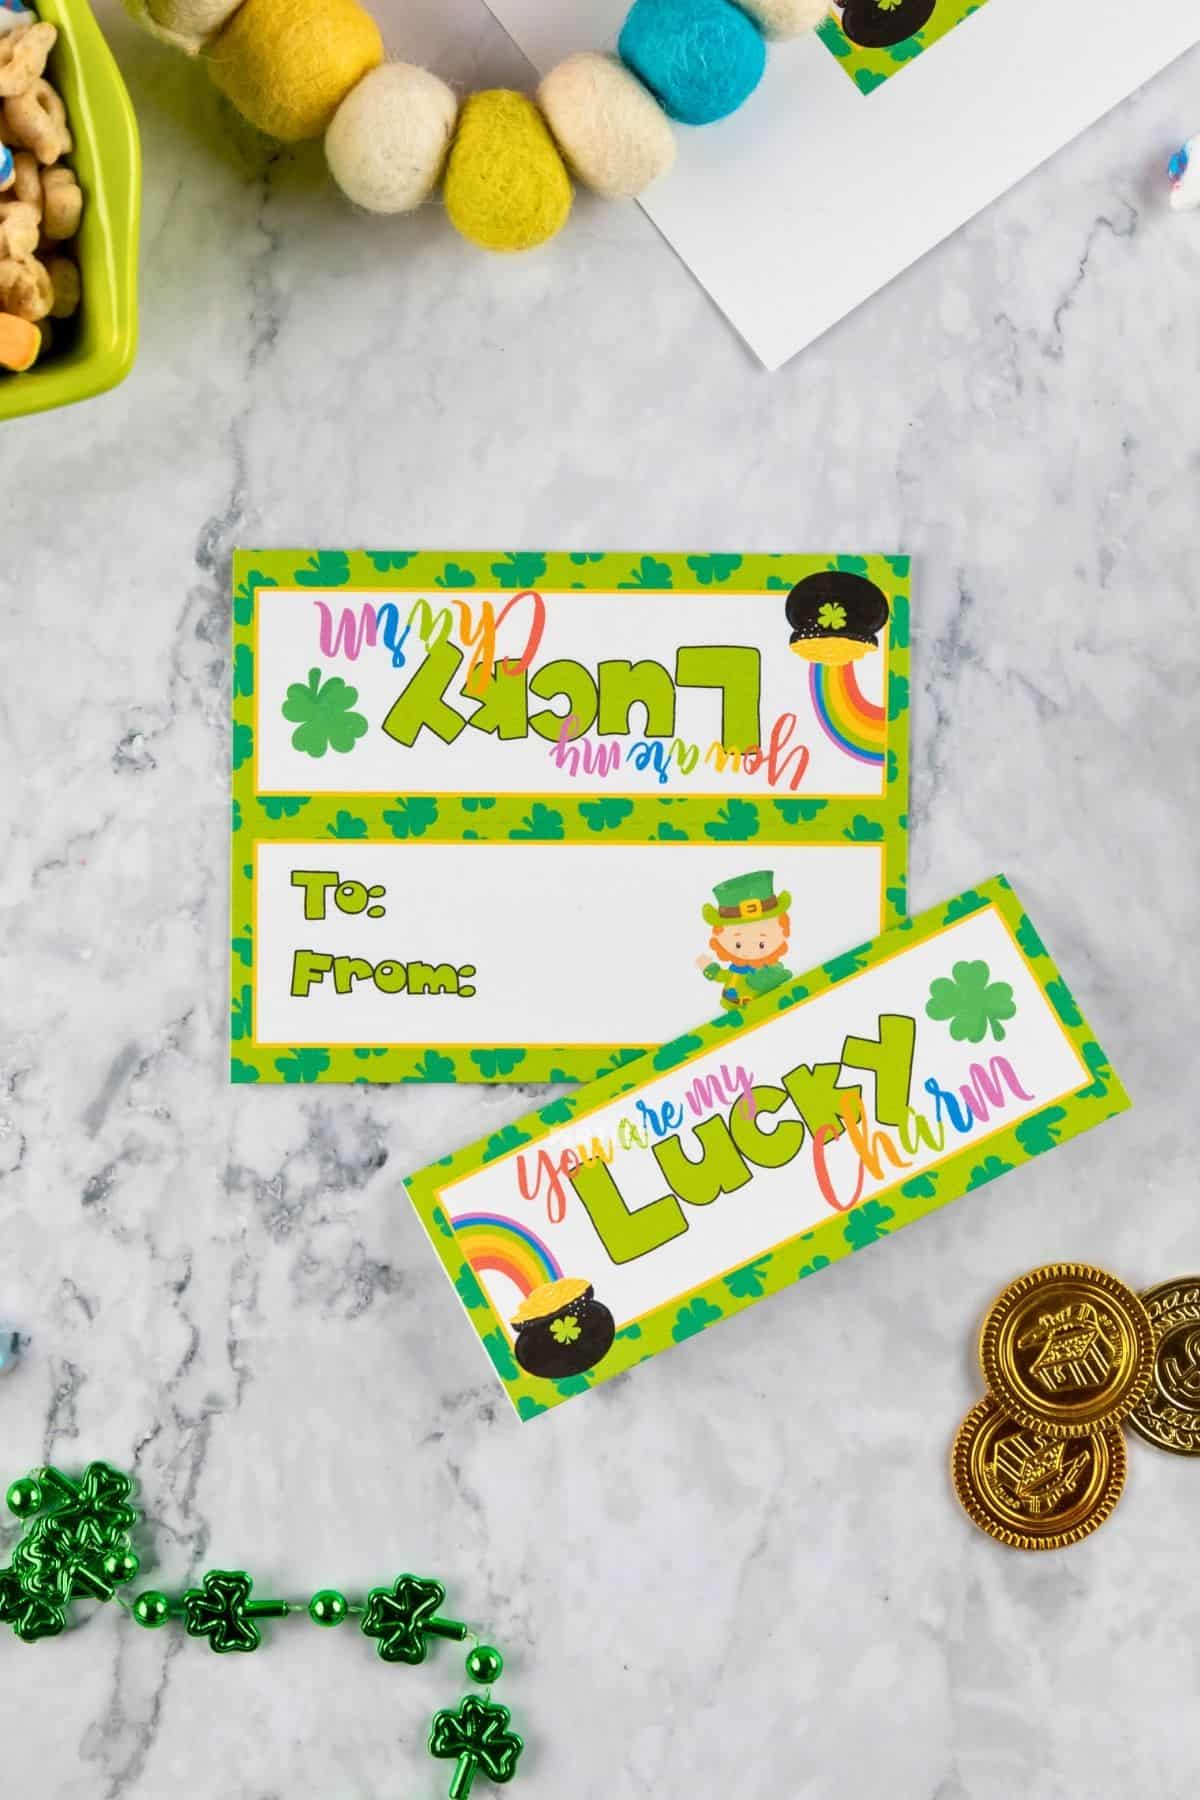 St. Patrick's Day Bag Toppers